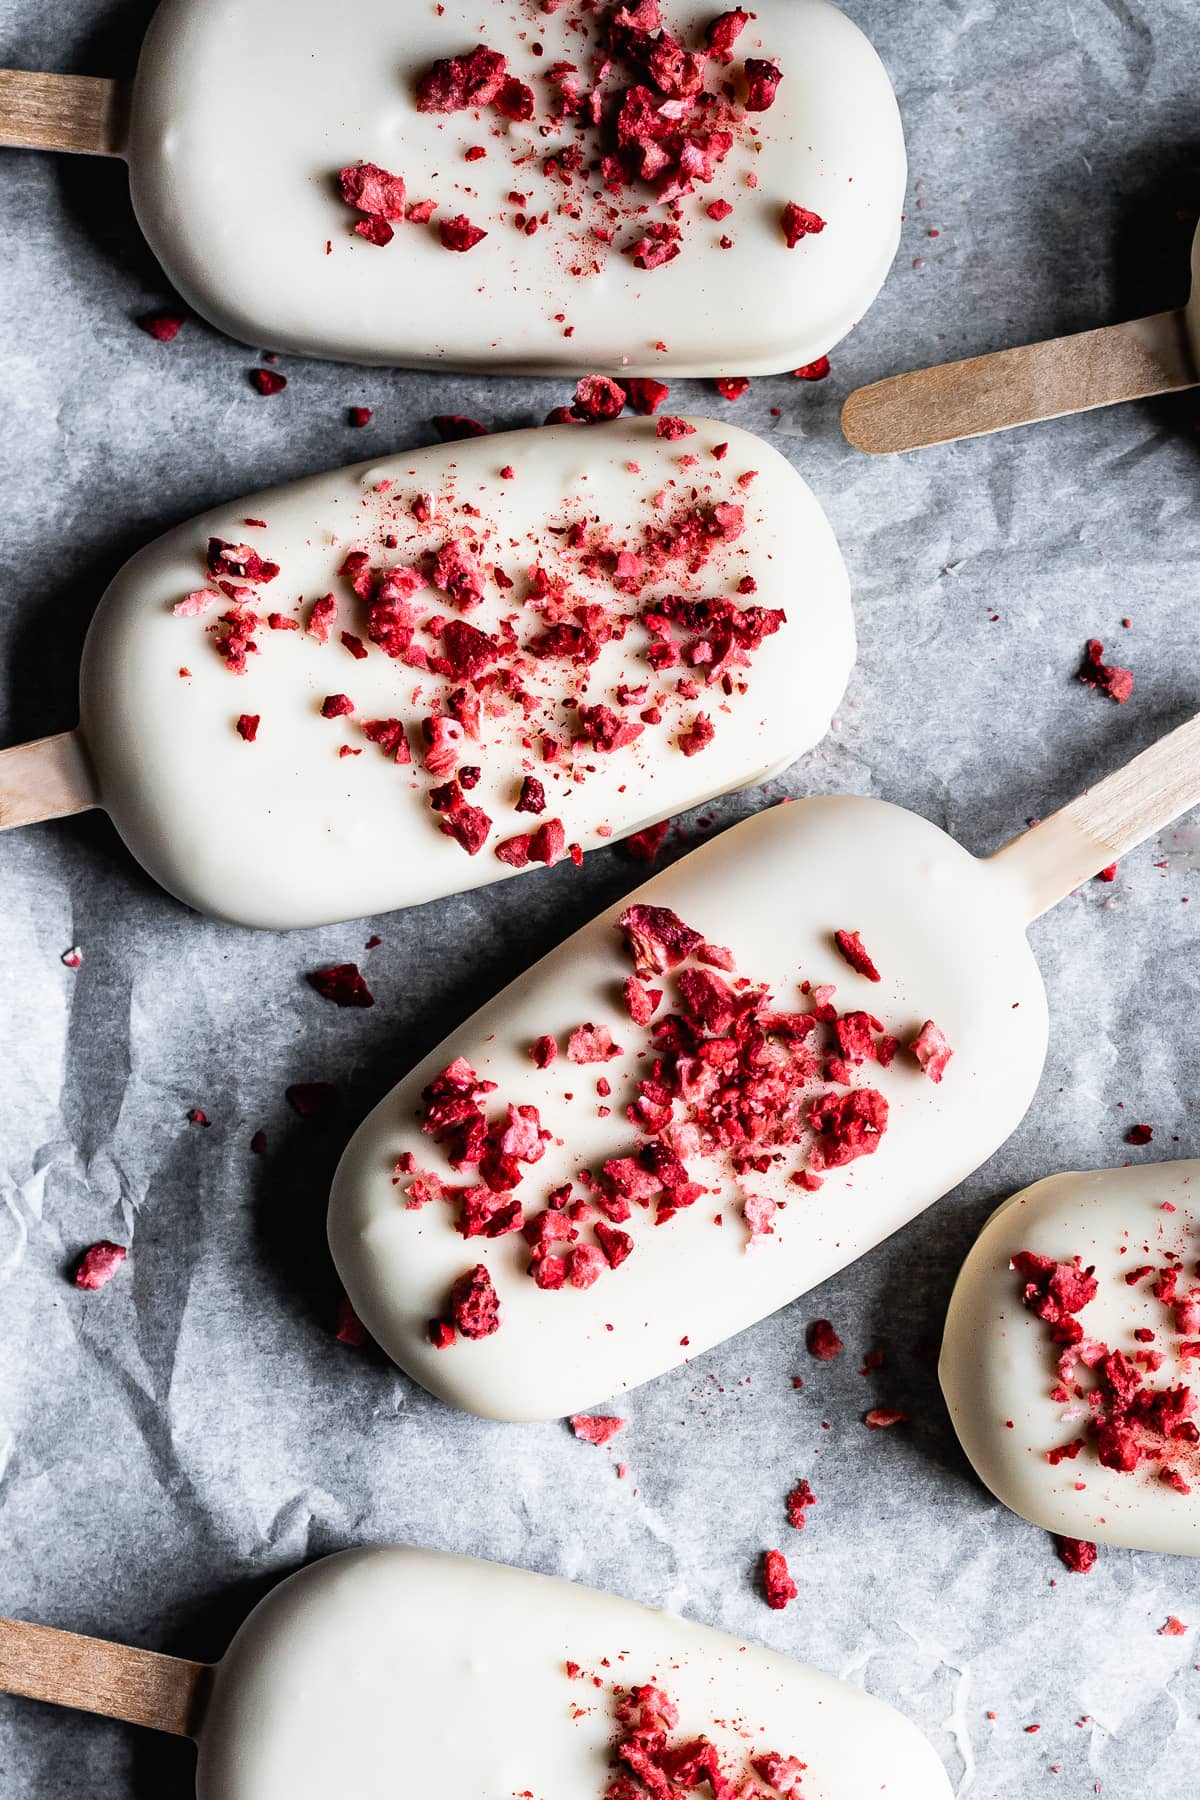 Several white chocolate covered ice cream bars with red freeze dried strawberry bits rest on a white parchment paper surface.